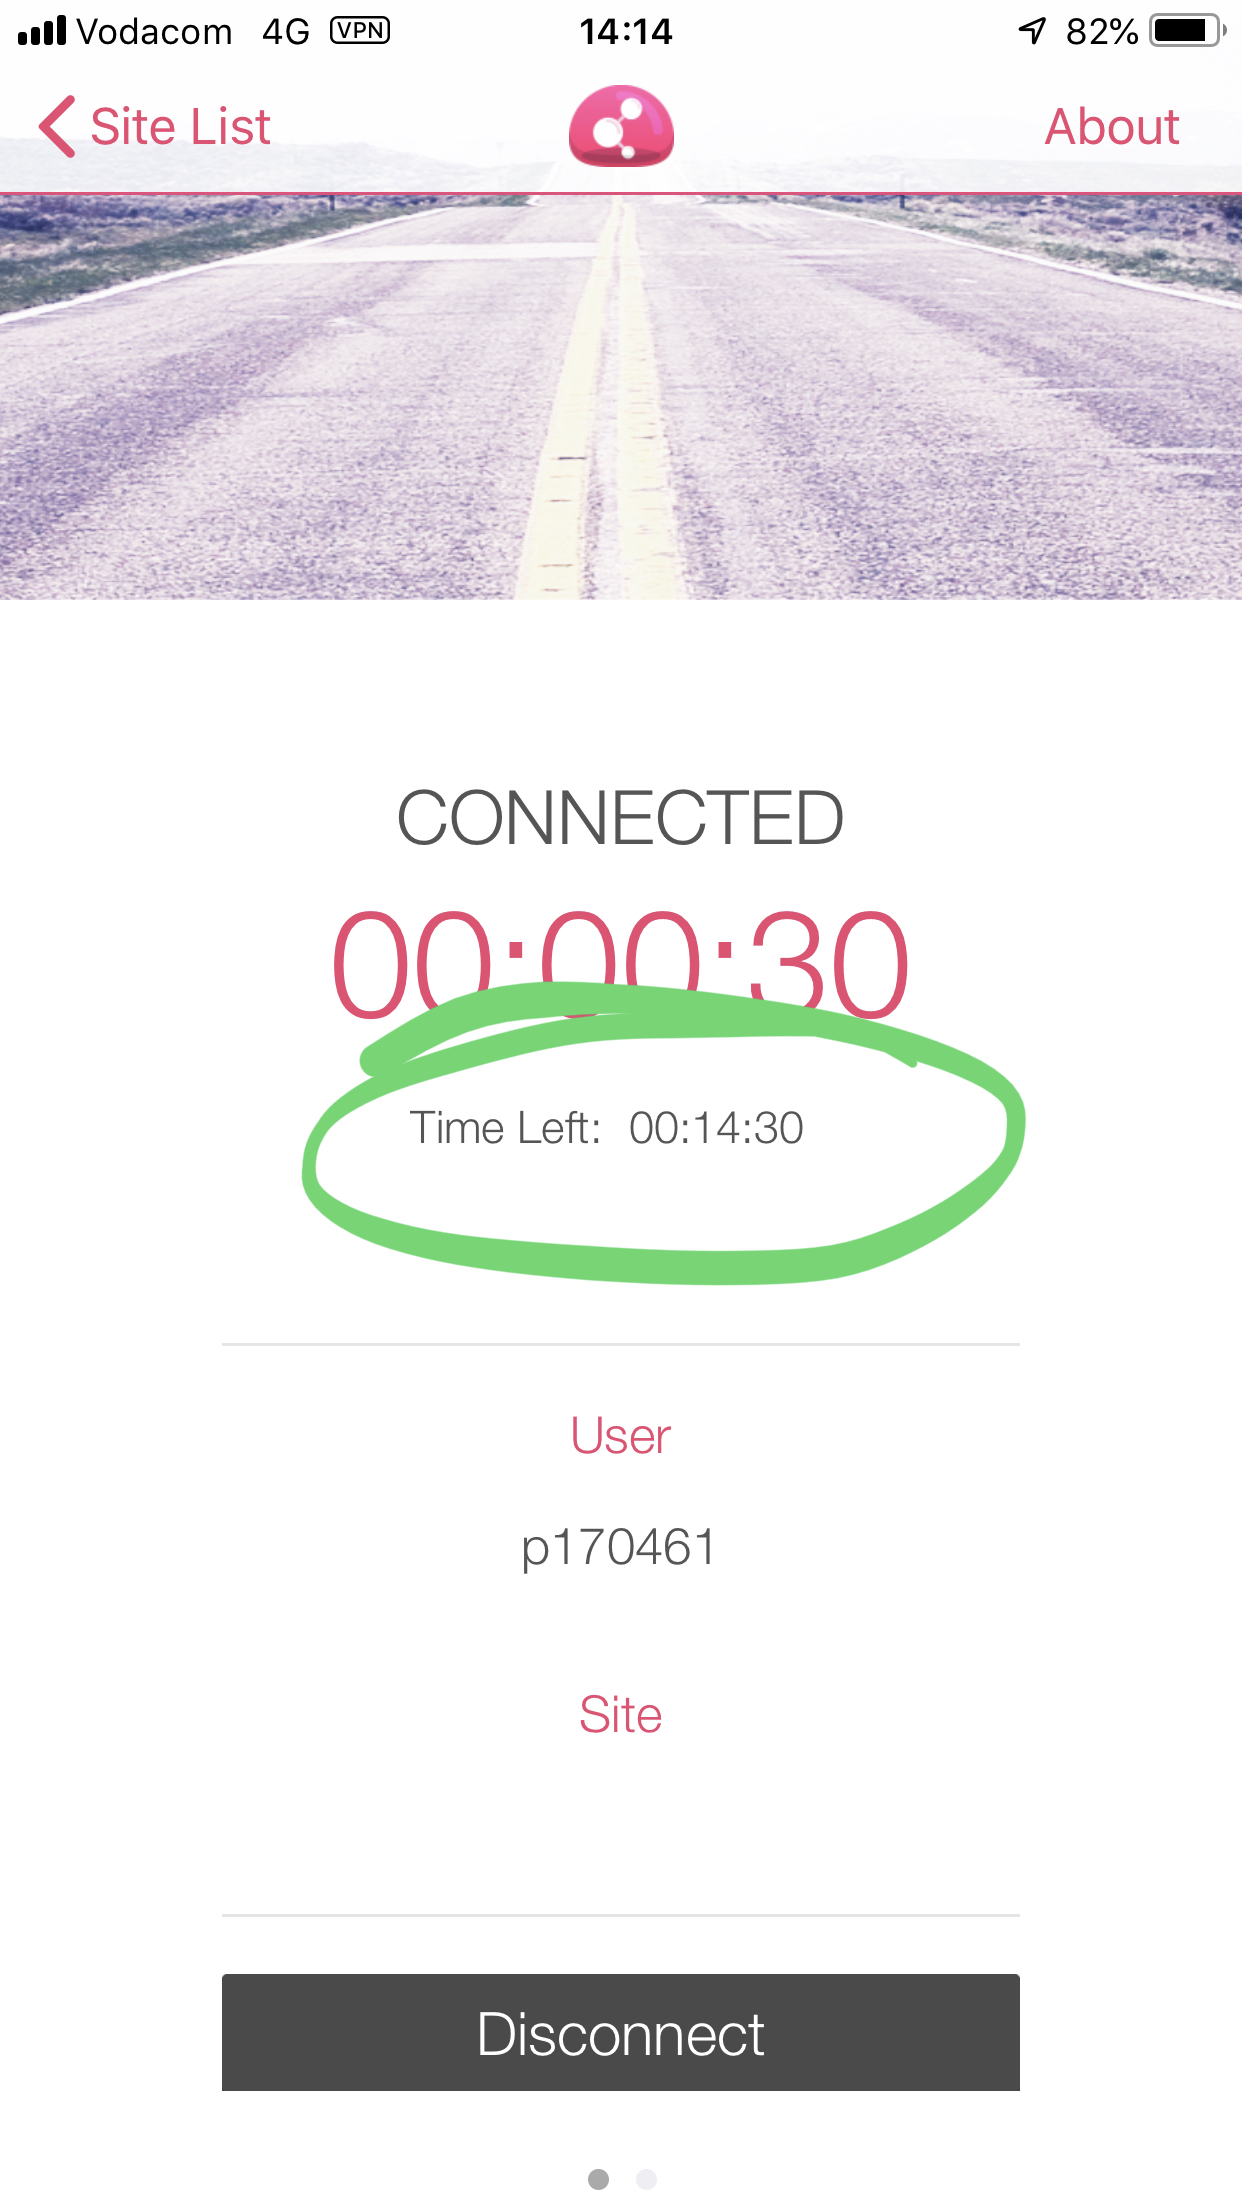 The timeout on Capsule connect is 15 minutes...I want to change it to last 2h30 minutes.